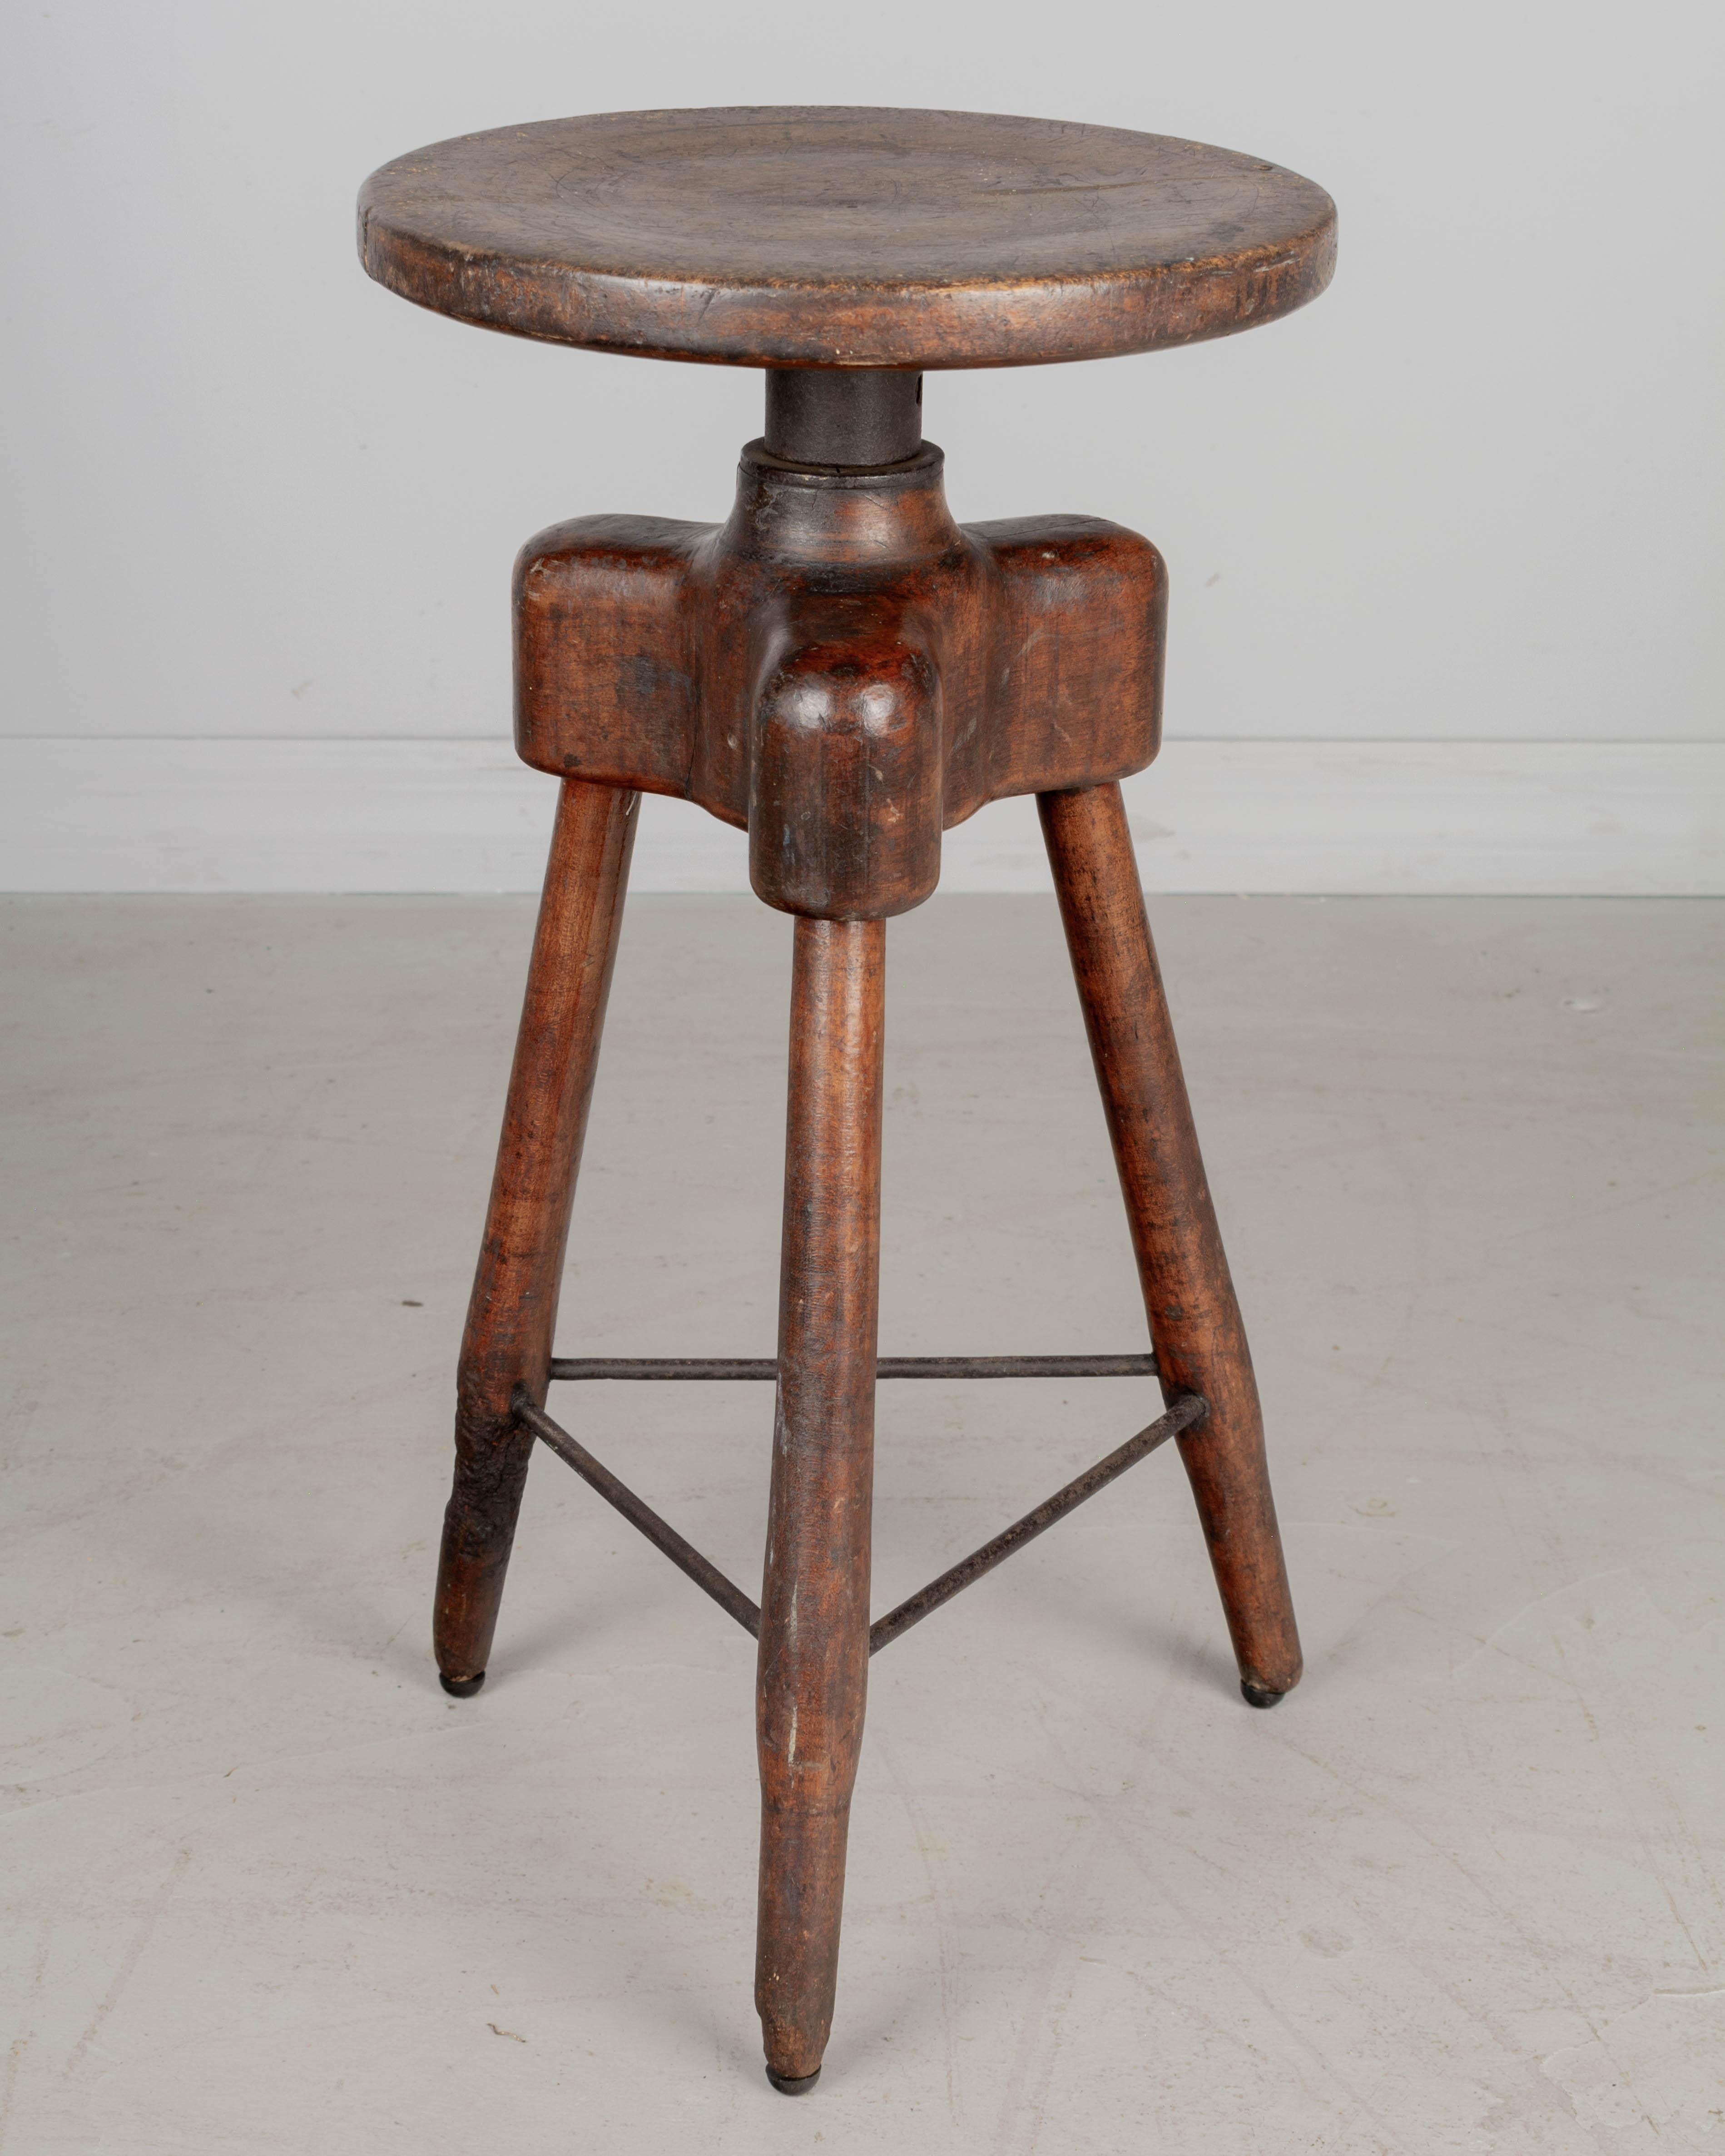 An Industrial swivel work stool, hand-crafted of solid maple with sturdy tripod base joined with iron rods. Nice rustic patina. Perfect for use as a drink table. Circa 1900.
20